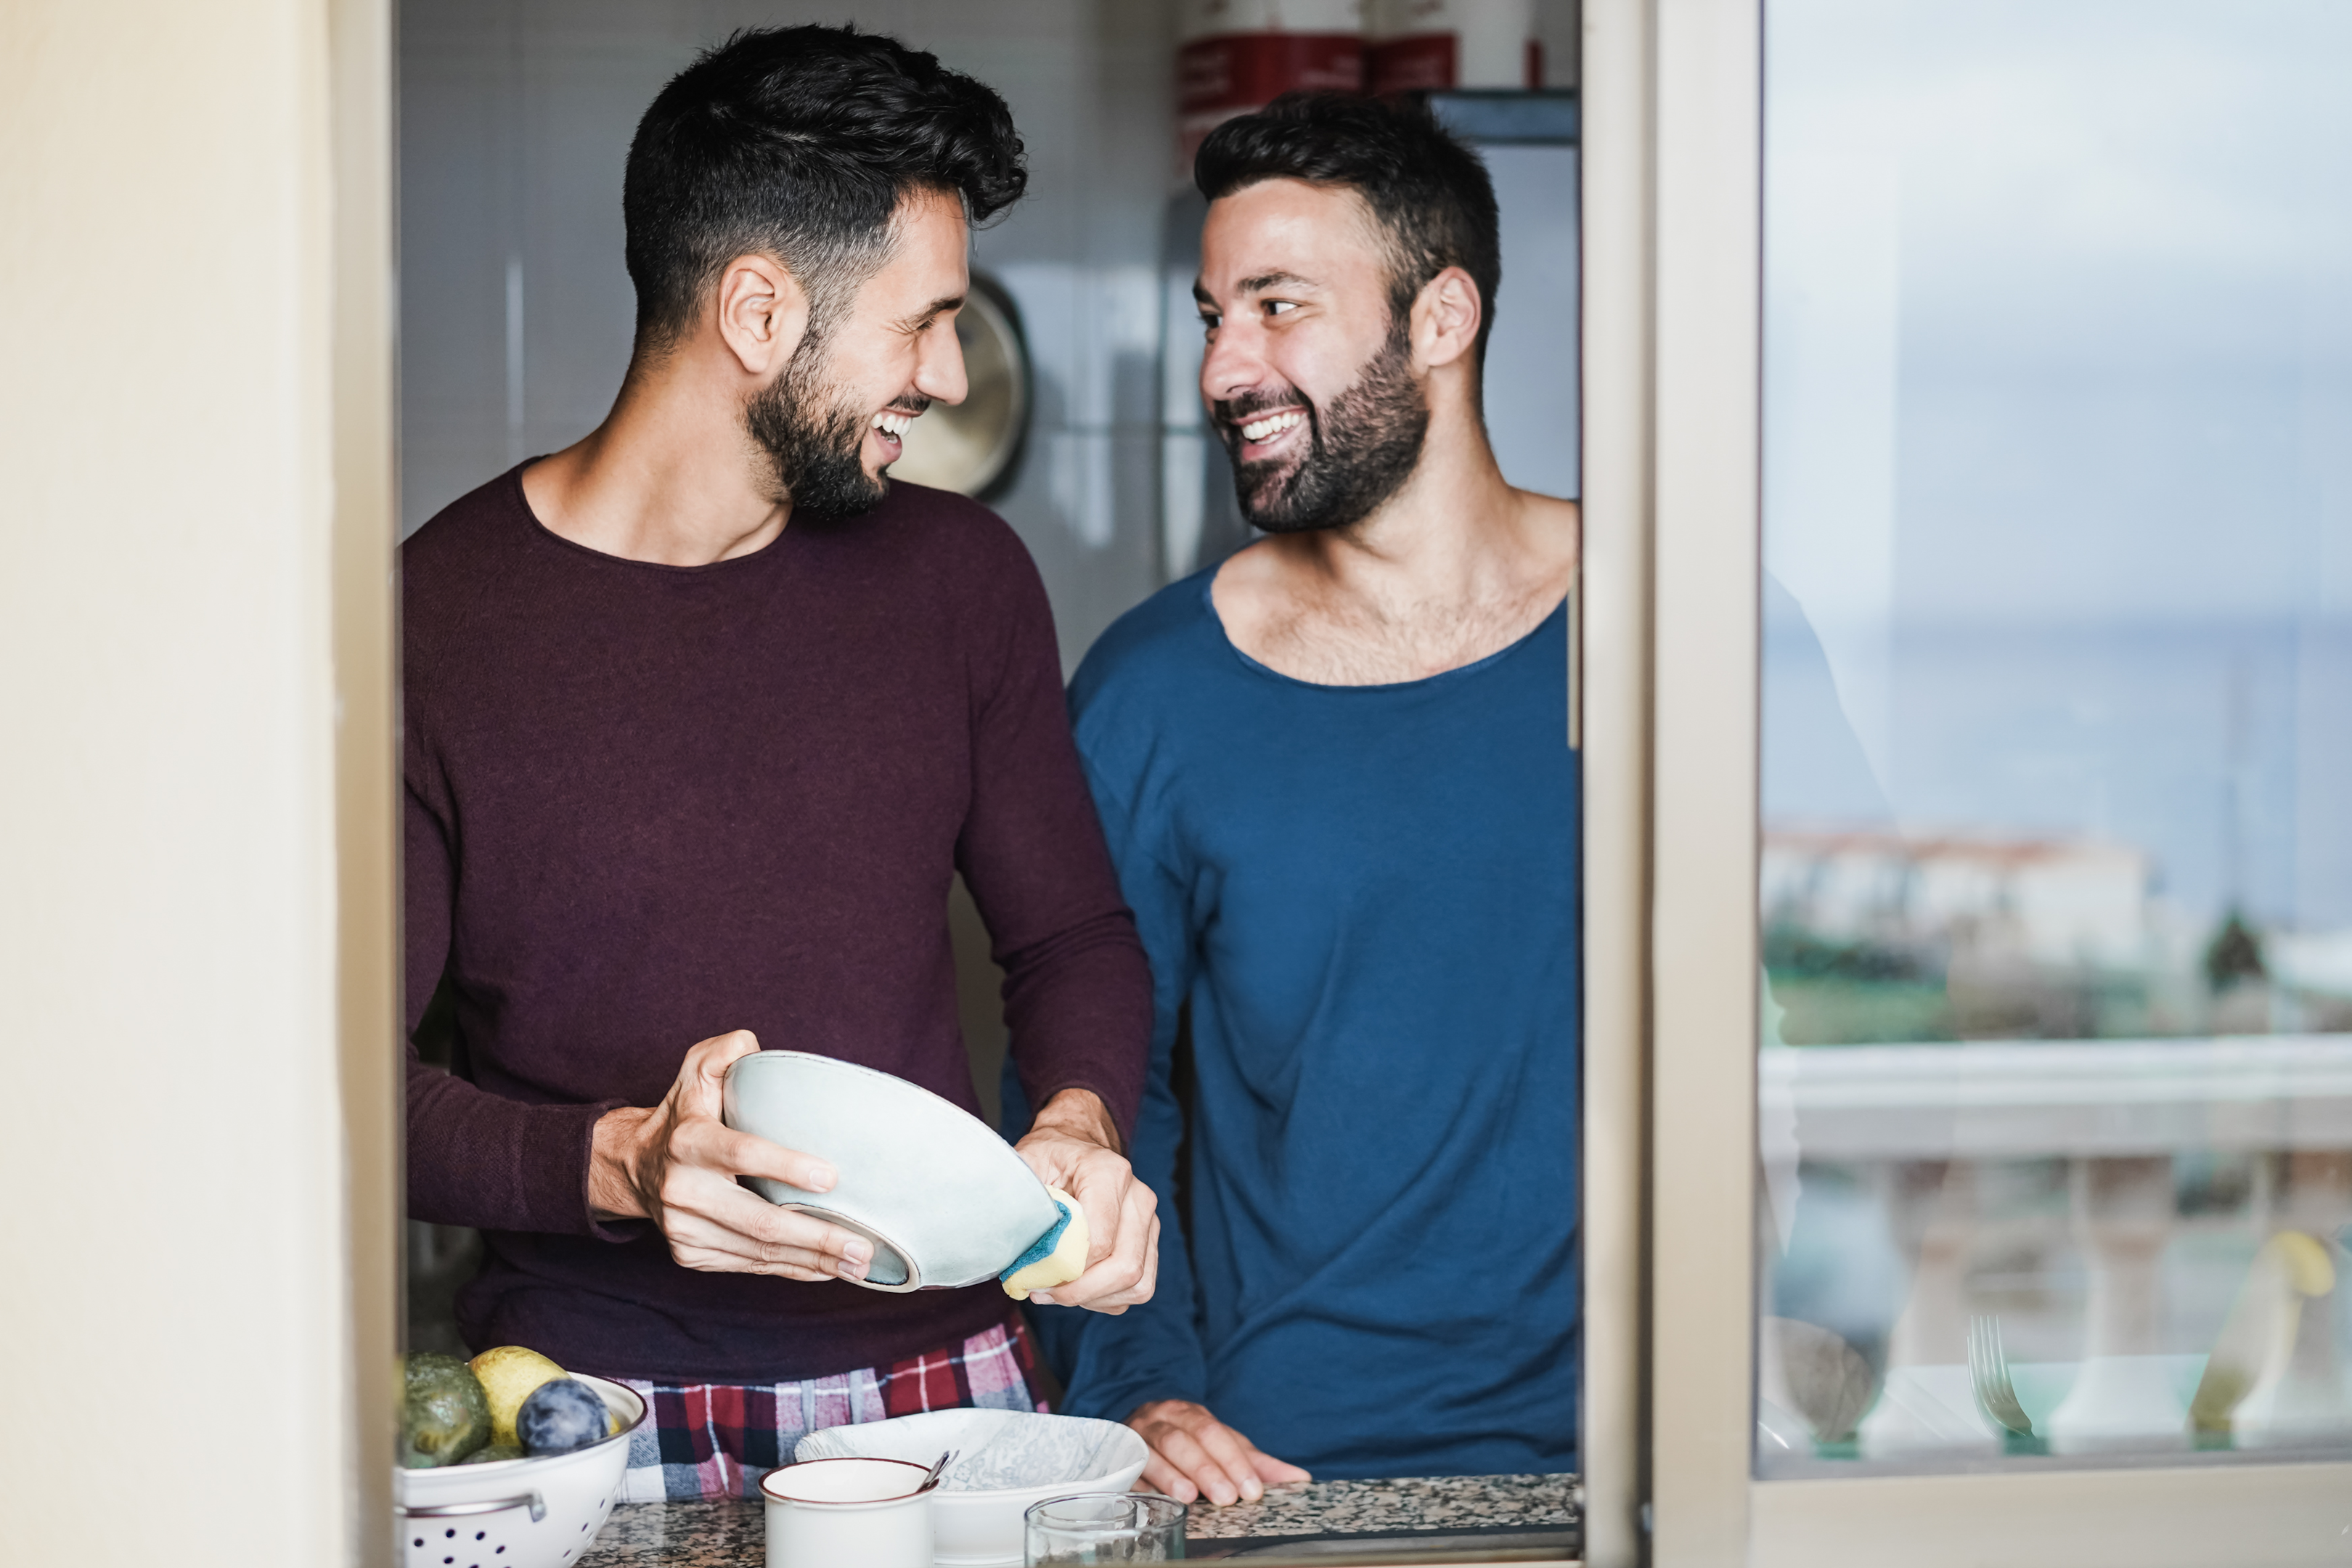 Gay couple in New York City successfully navigating an open relationship without committing adultery or infidelity, thanks to guidance from Loving at Your Best Marriage and Couples Counseling.